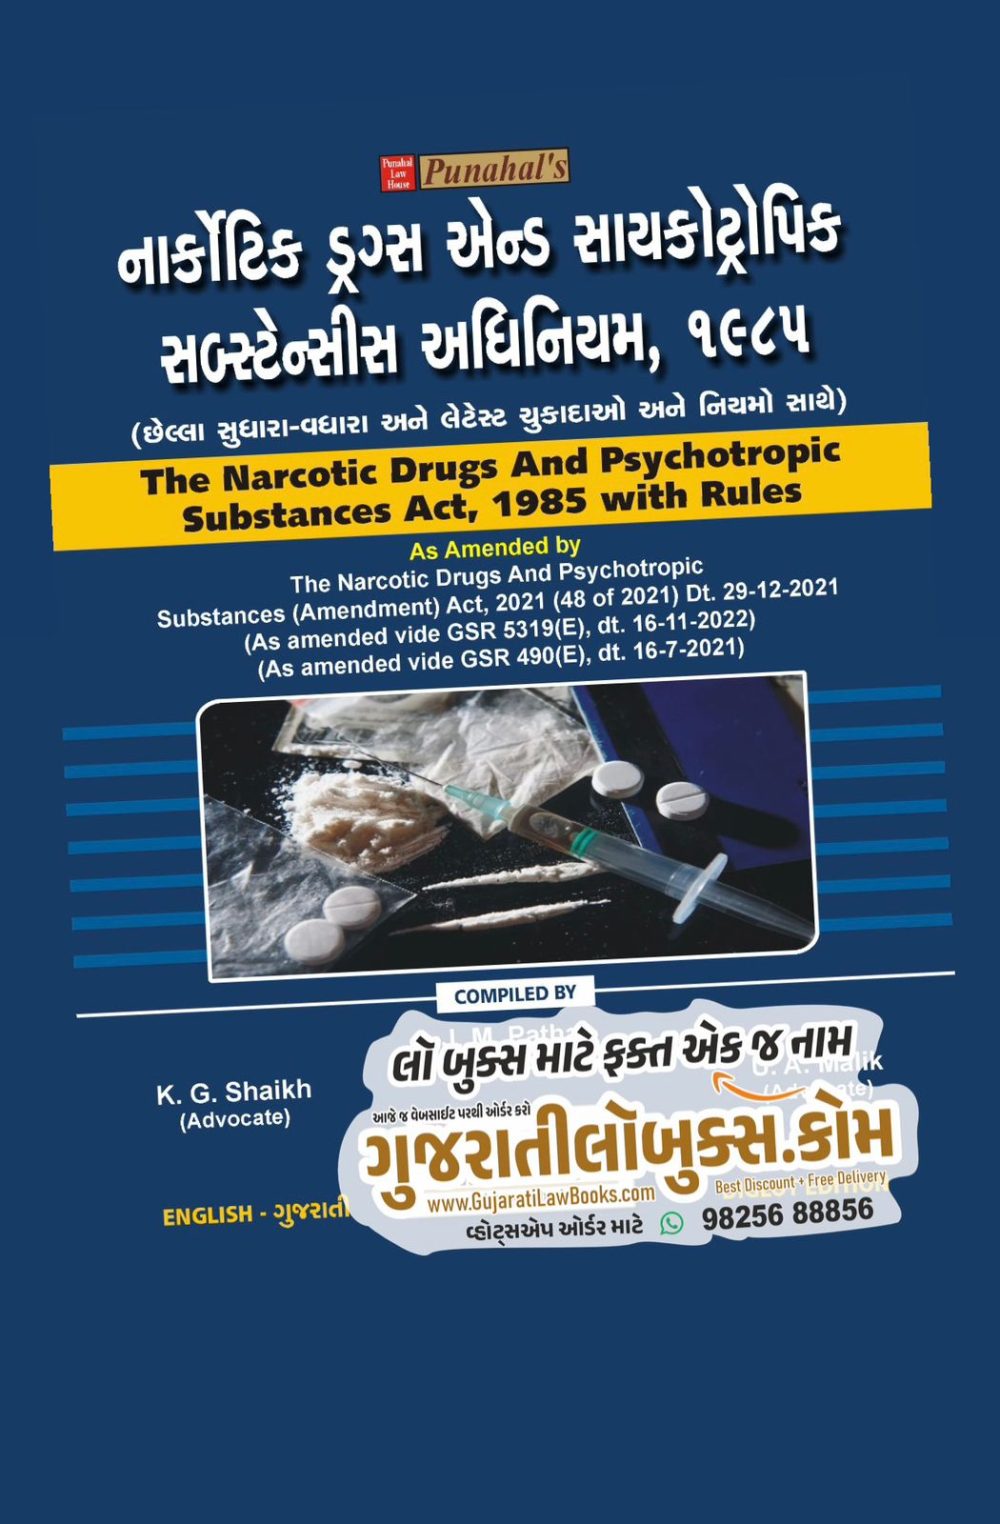 NDPS Narcotic Drugs and Psychotropic Substances Act, 1985 Act with Rules (In English + Gujarati) - Latest October 2023 Edition